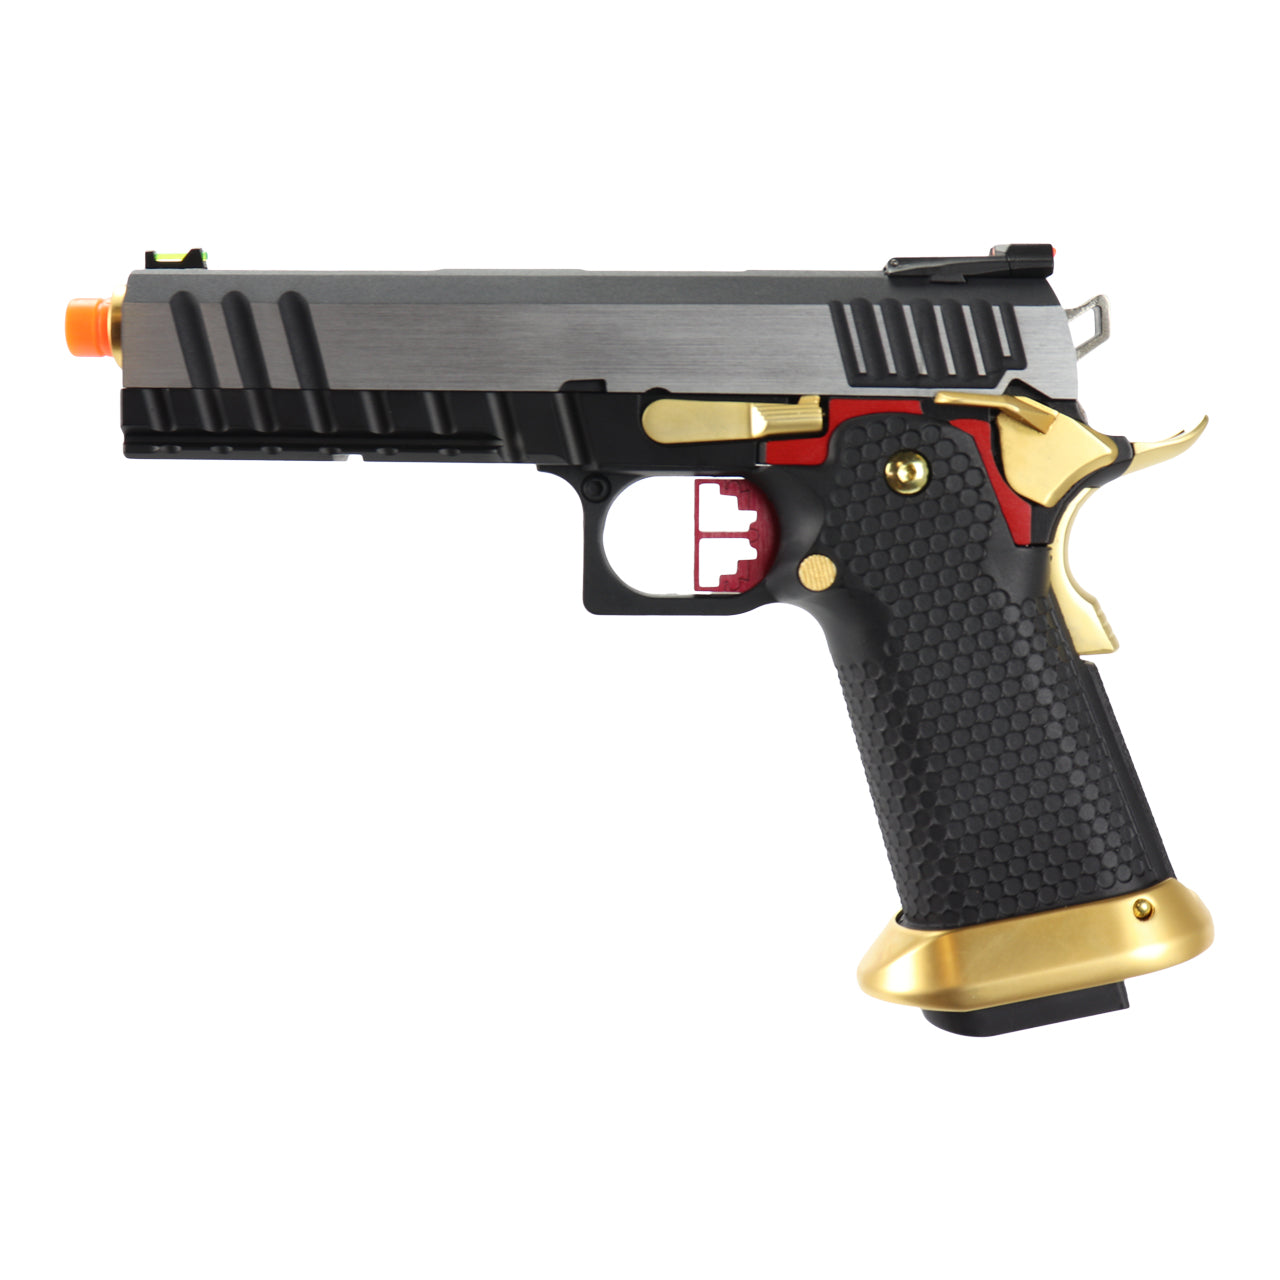 AW Custom "Competitor" Hi-CAPA Gas Blowback Airsoft Pistol Two Tone